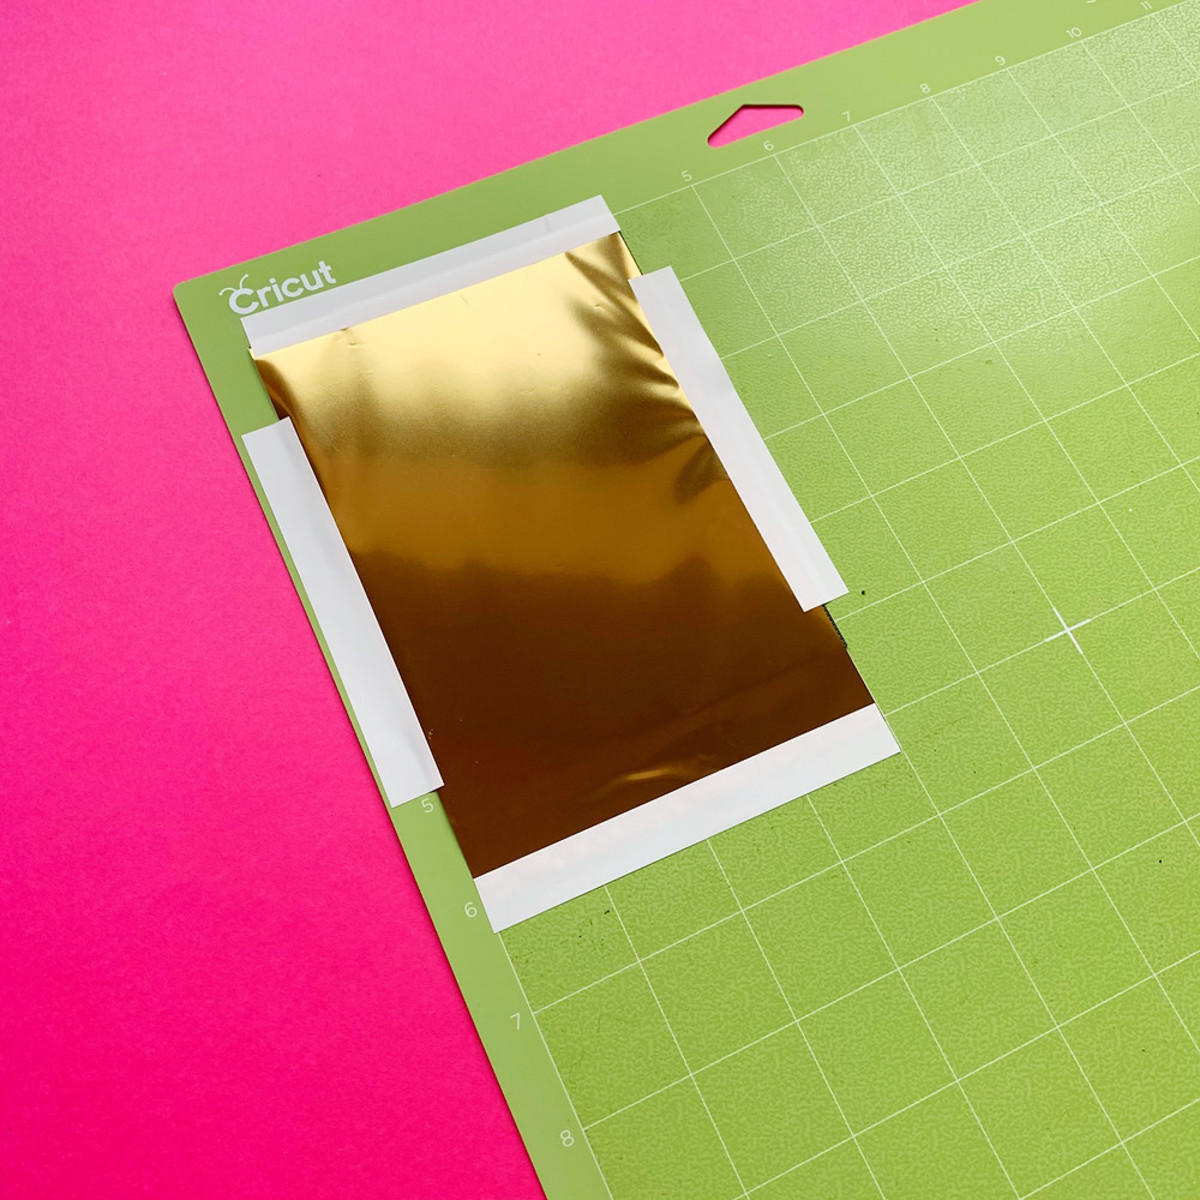 Correct way to place foil on the mat: The foil should be placed over the cardstock and then taped onto the mat.